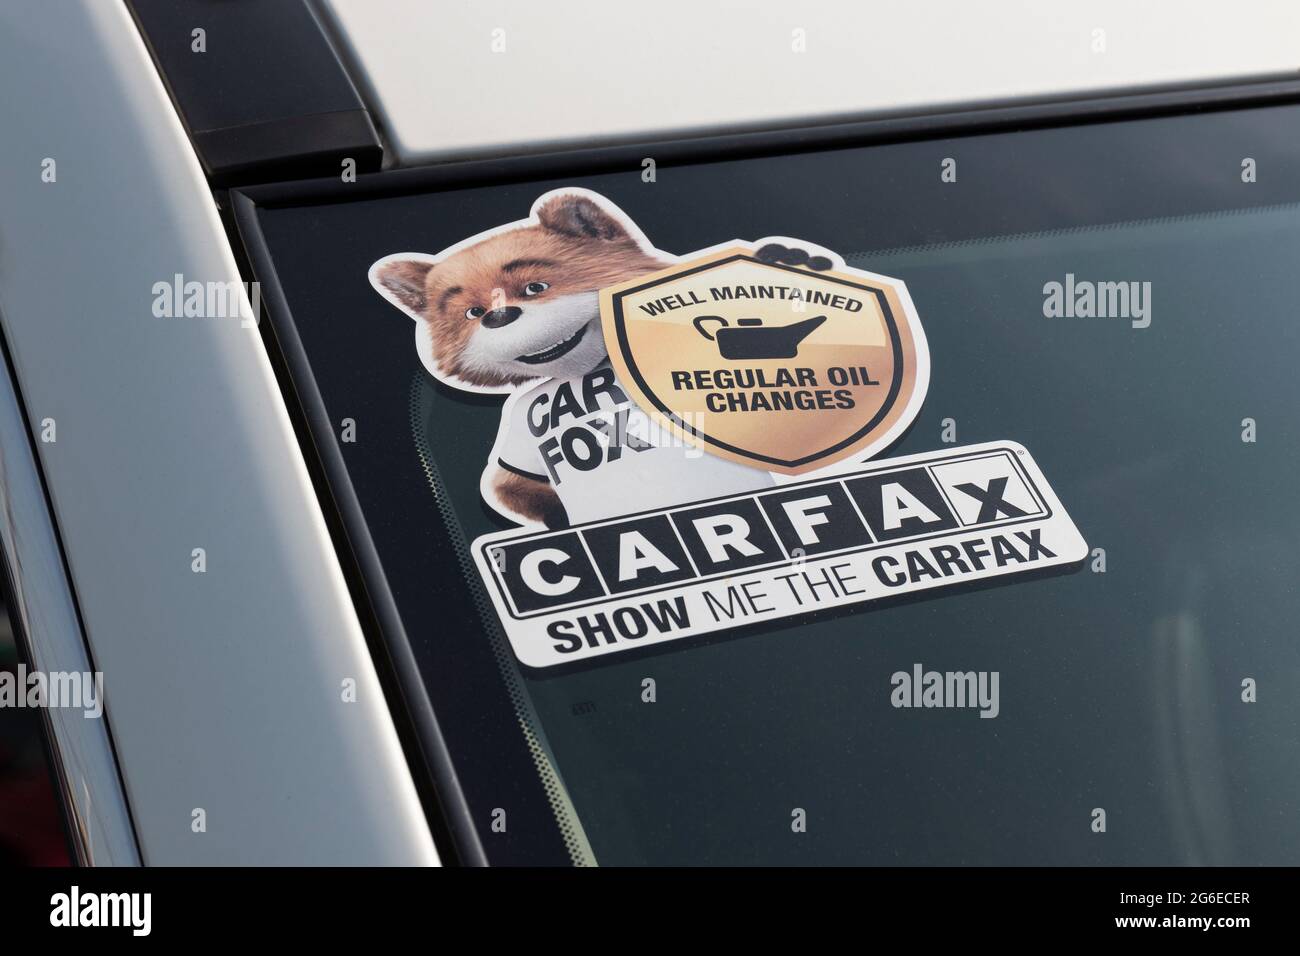 Cincinnati - Circa July 2021: Carfax sticker on a used pre-owned vehicle. Carfax provide vehicle reports for prospective buyers that may reveal proble Stock Photo